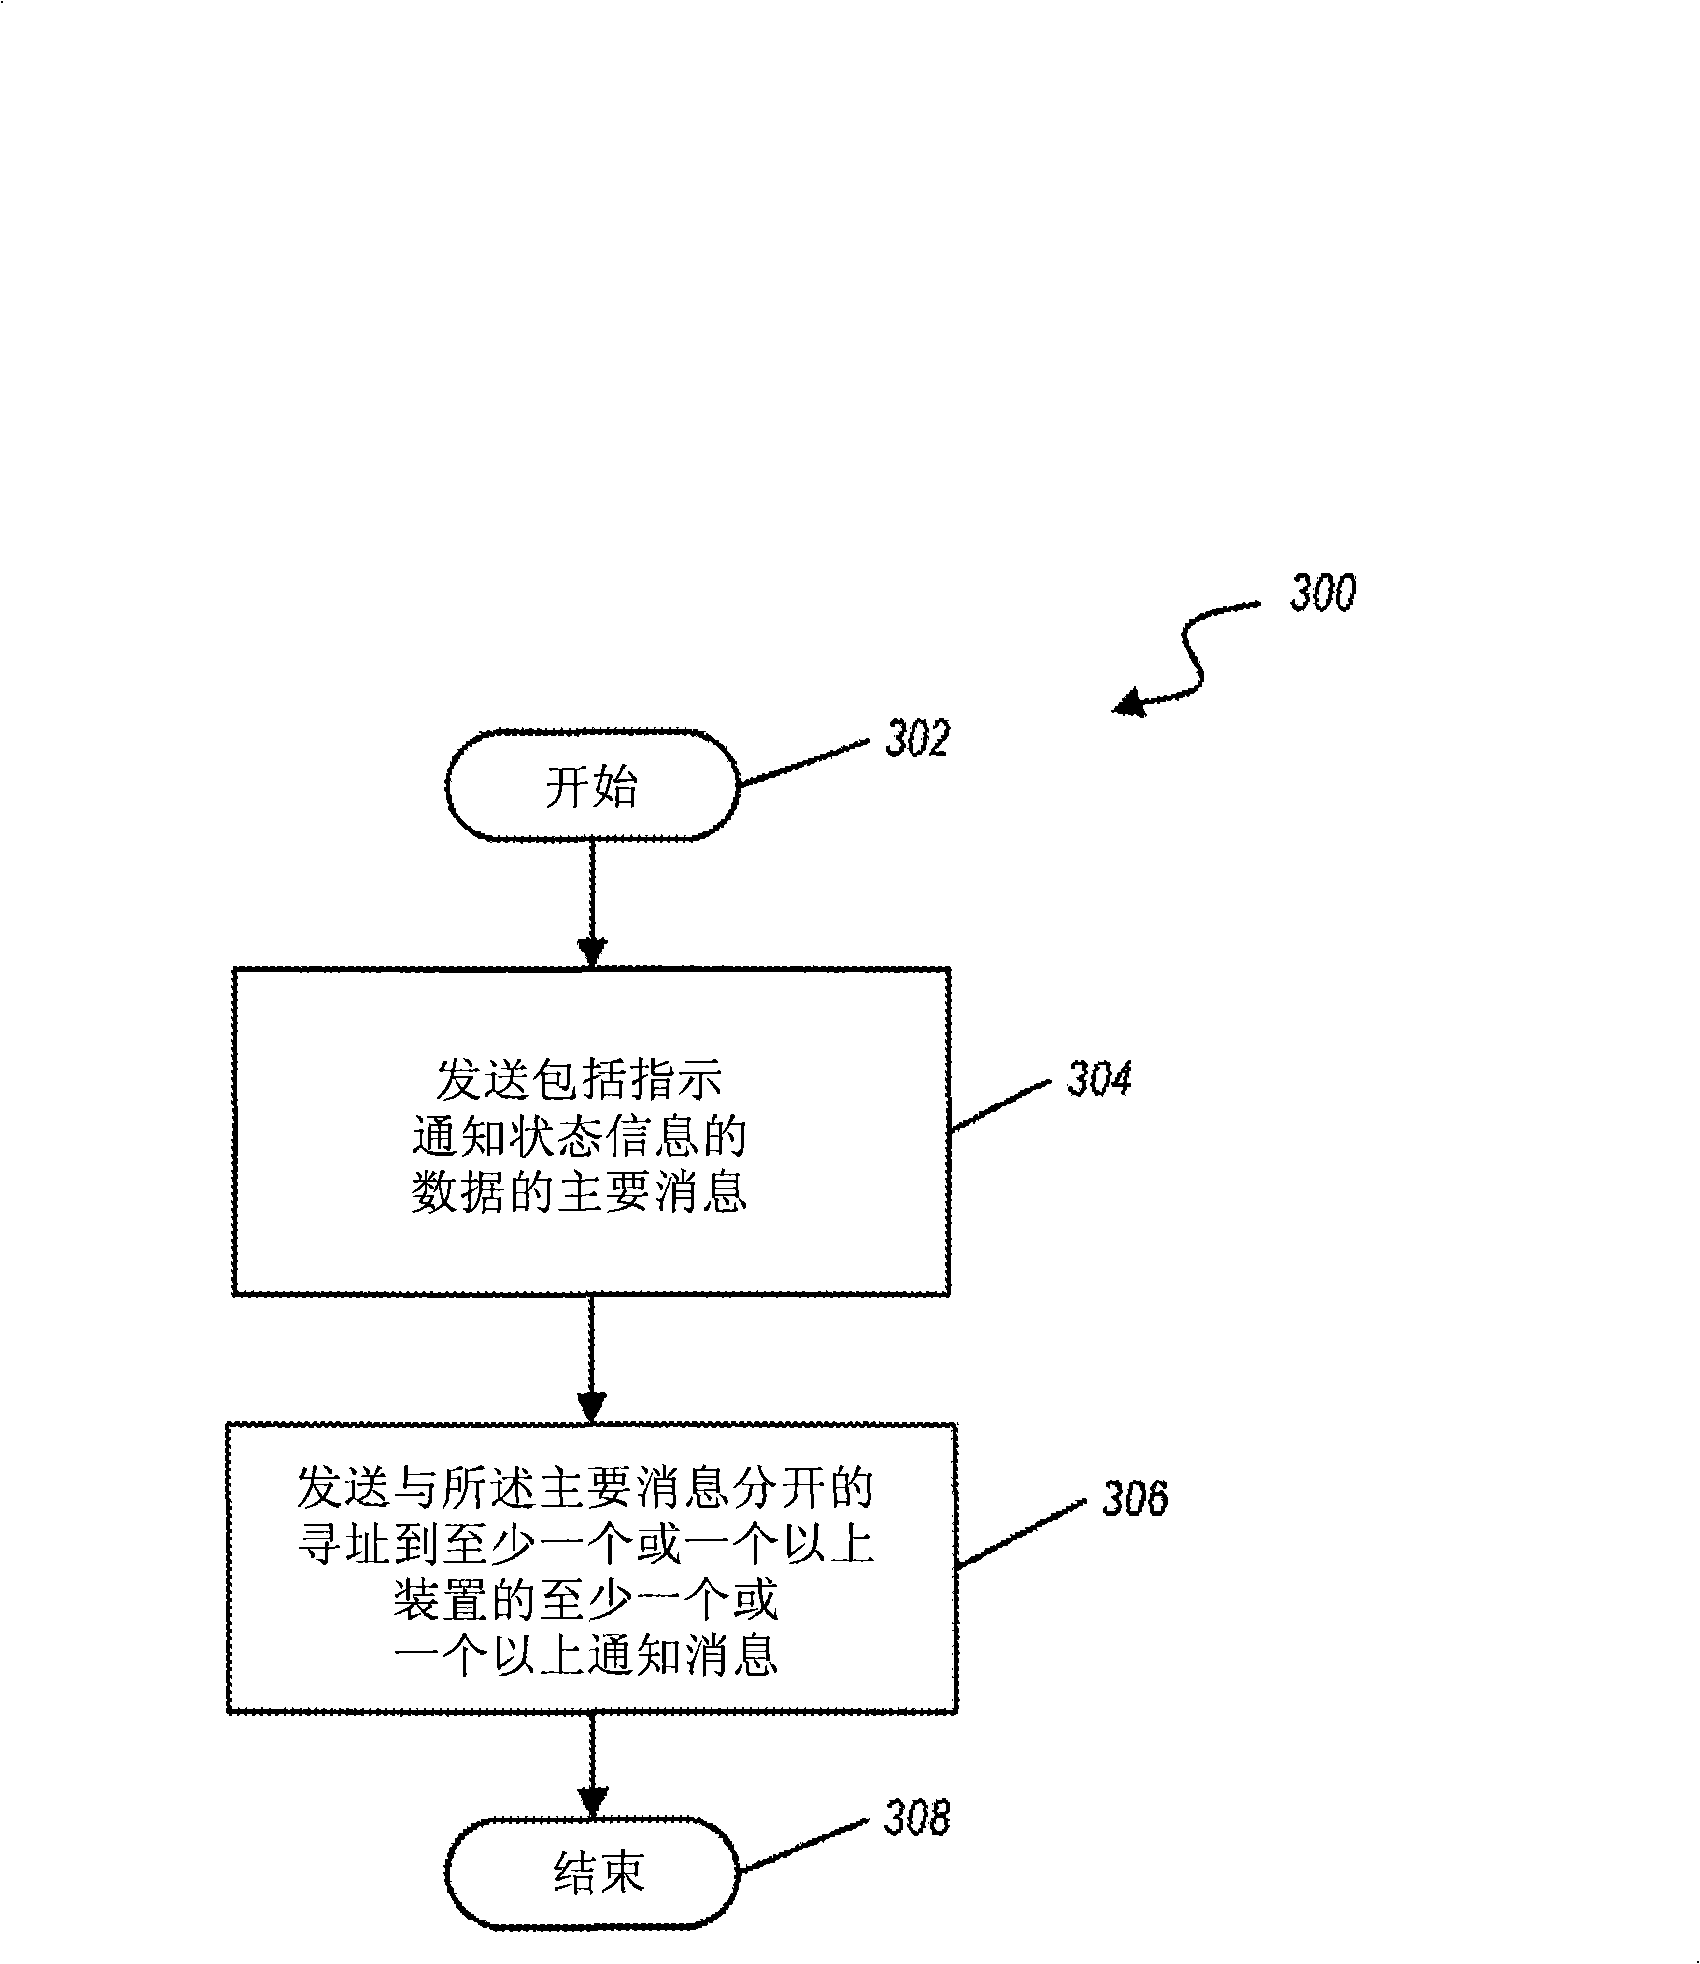 Communication of notifications in a wireless broadcast network